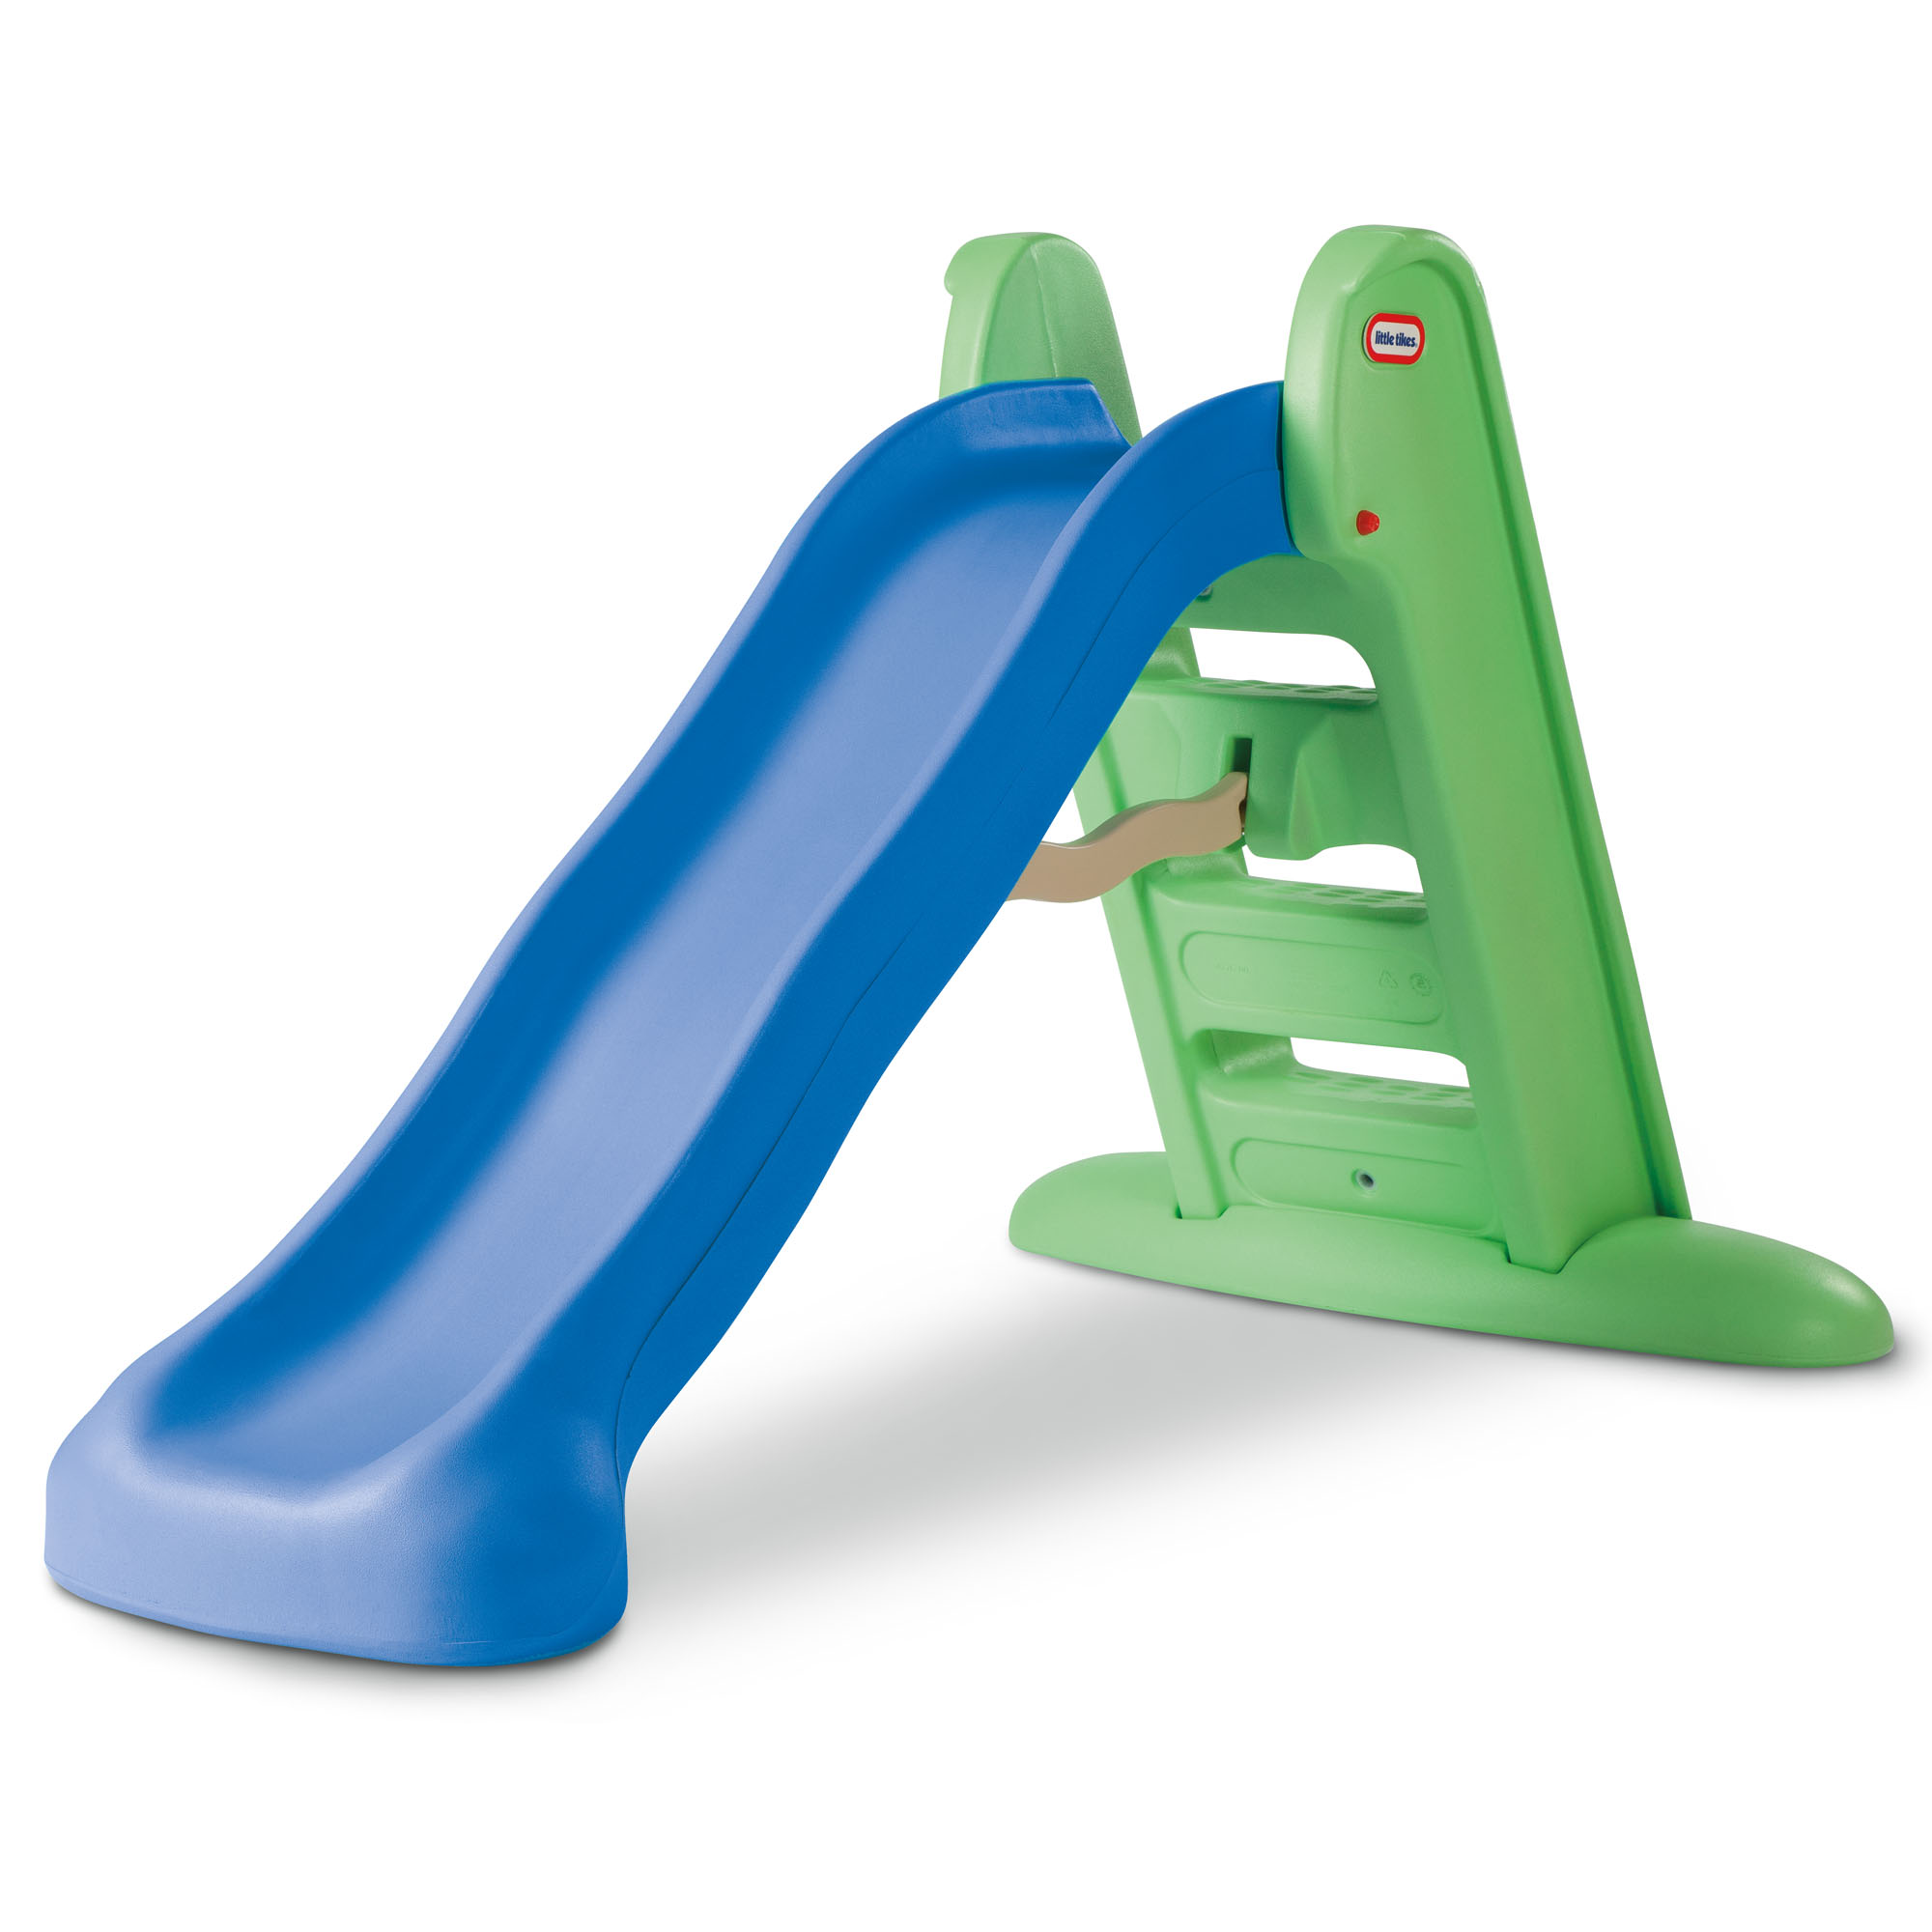 Little Tikes Easy Store Large Playground Slide with Folding for Easy Storage, Outdoor Indoor Active Play, Blue and Green- For Kids Toddlers Boys Girls Ages 2 to 6 Year old - image 3 of 5